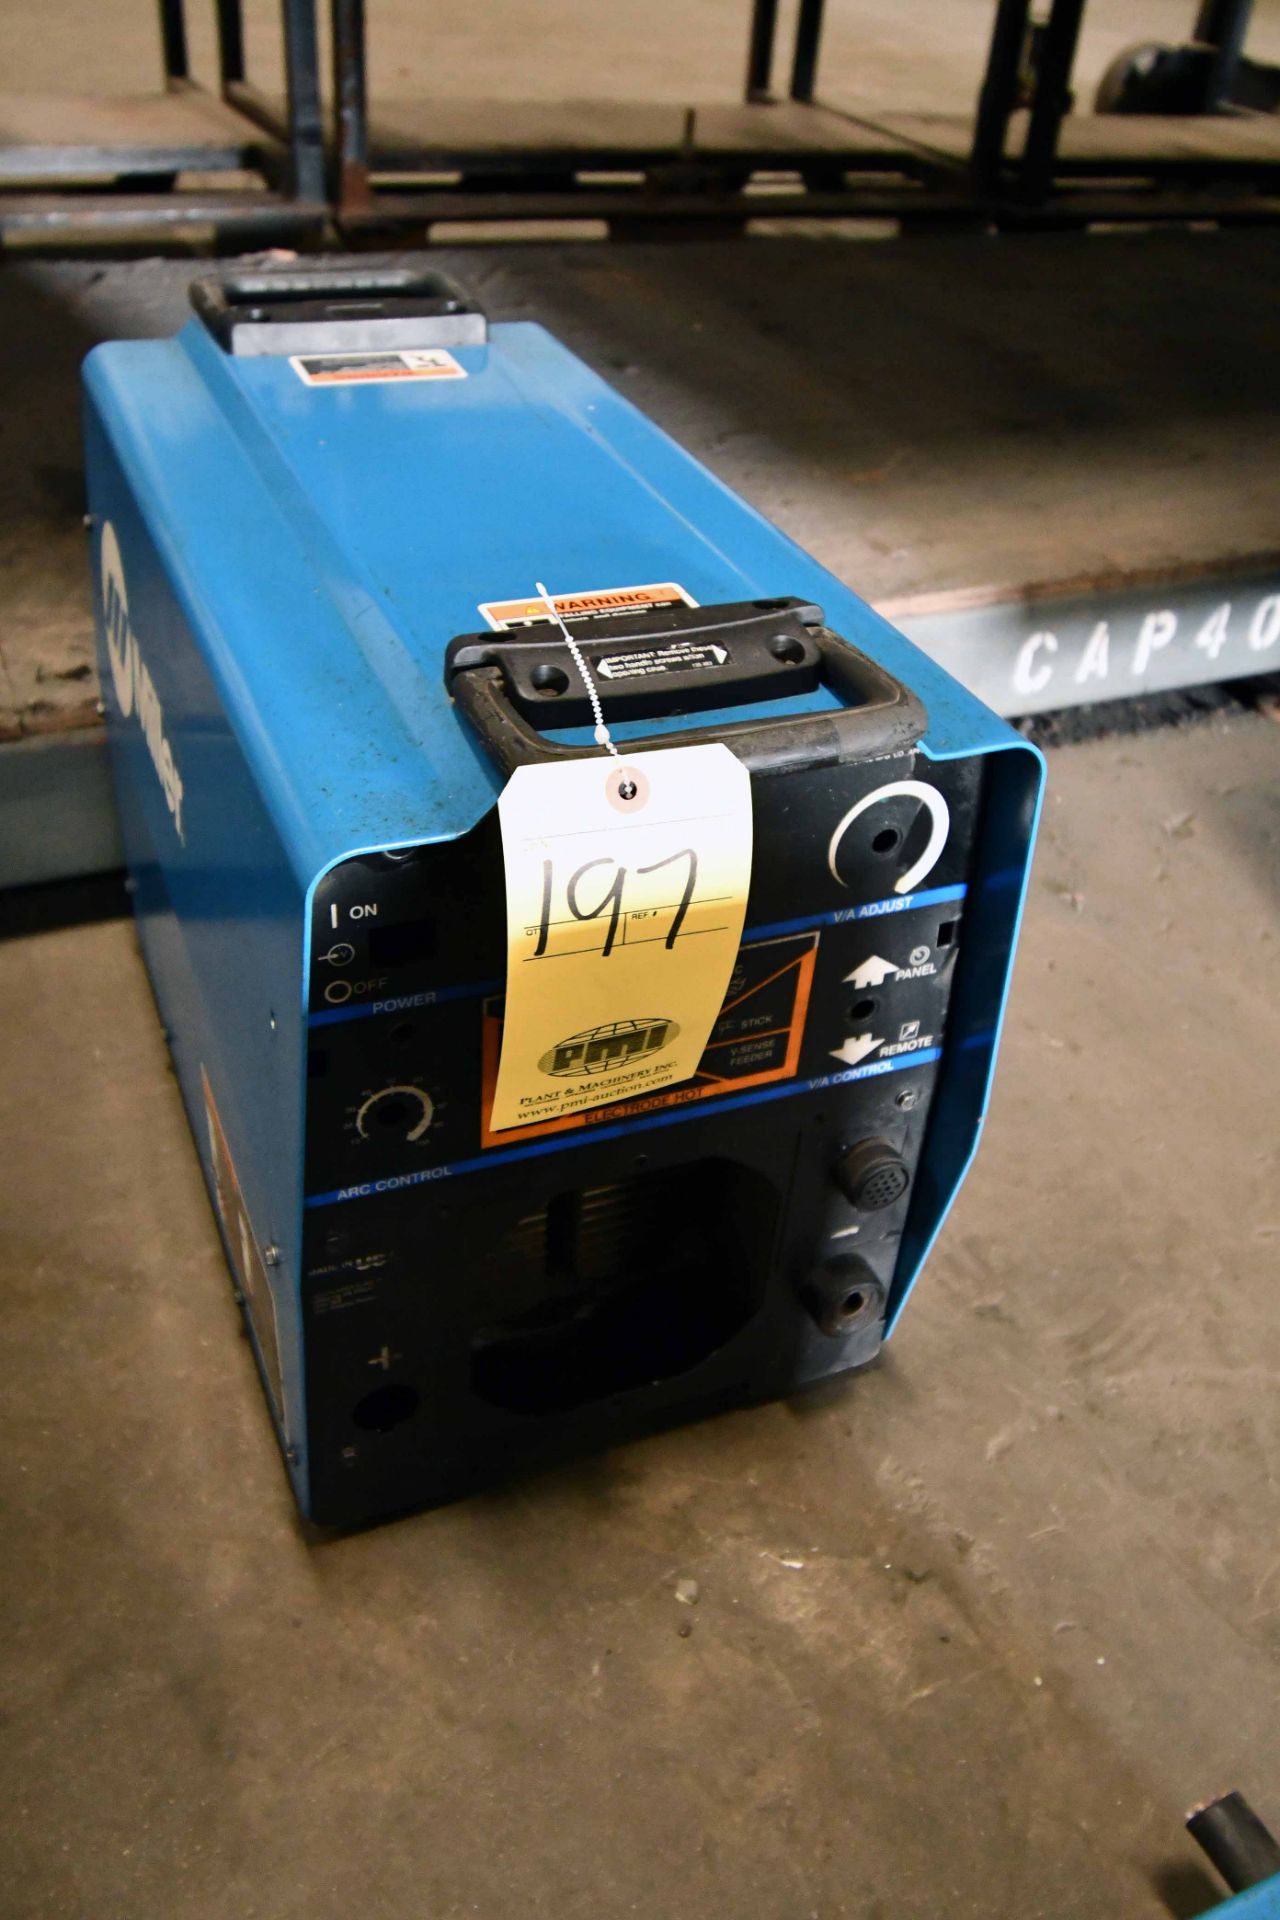 WELDING POWER SOURCE, MILLER XMT 304 CC/CV, new 1999, 32 v., 300 amp @ 60% duty cycle, S/N